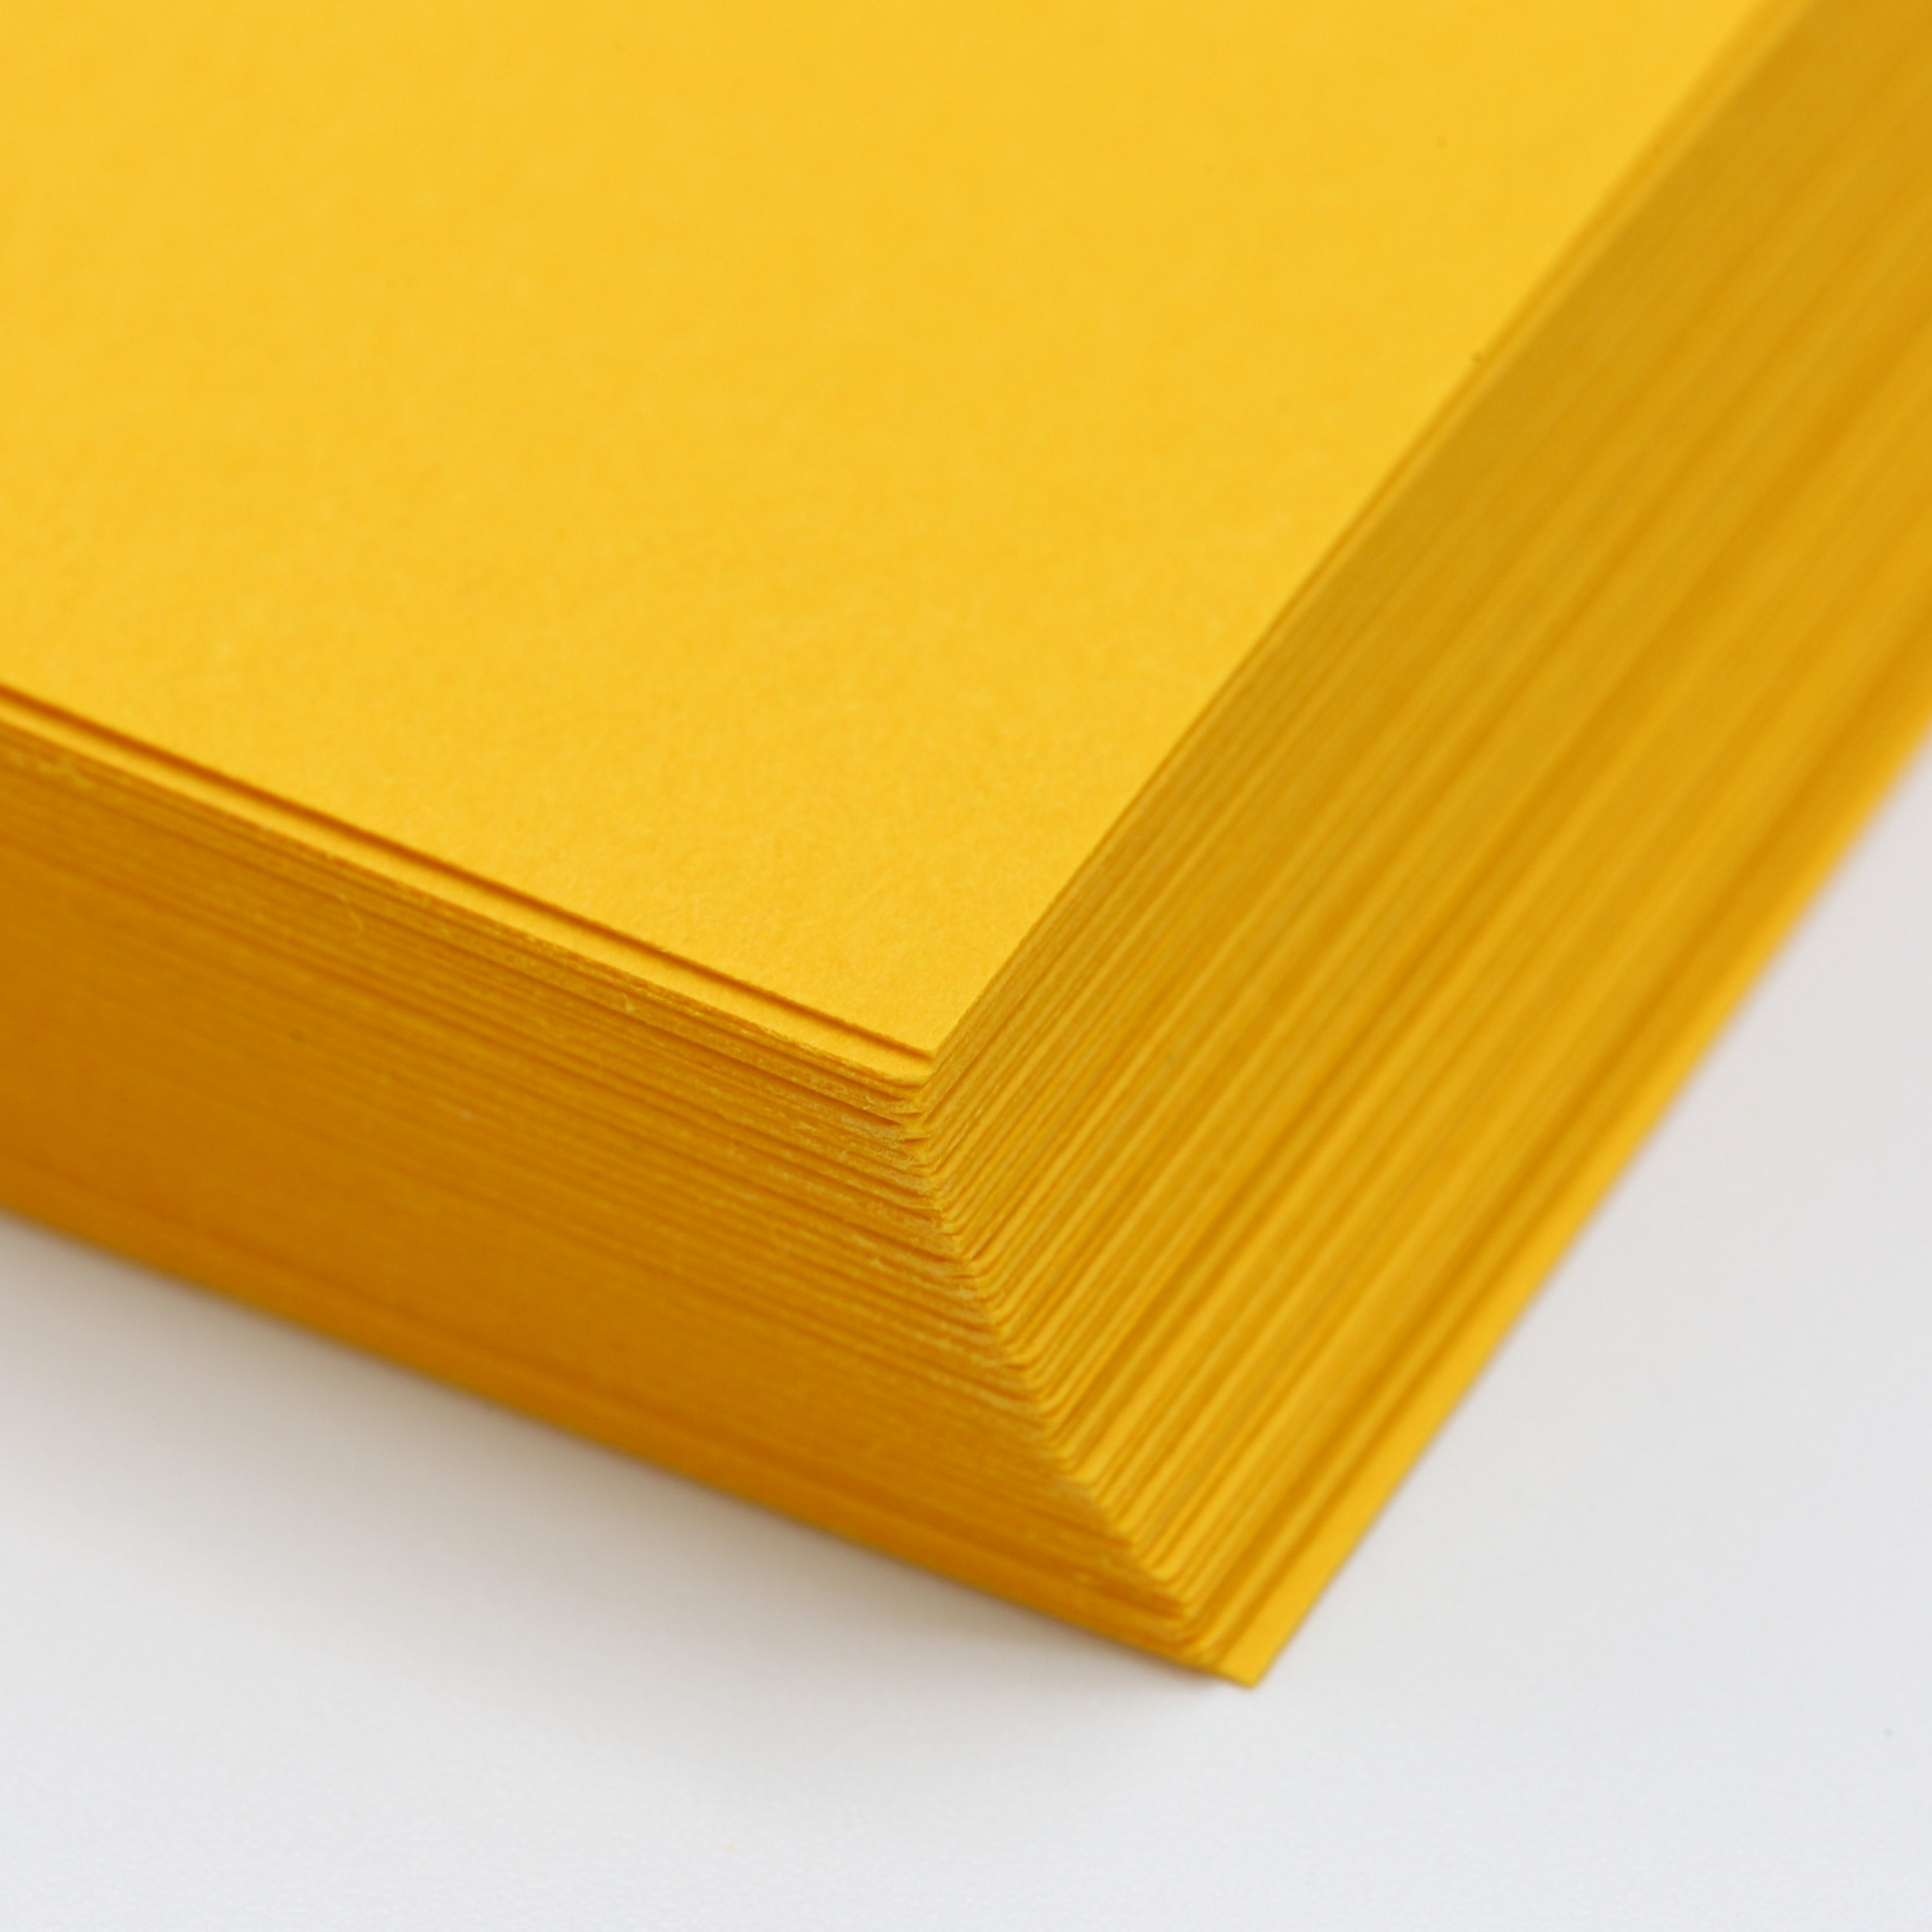 Neenah Paper Astroparche Cardstock, 65lb, 8.5 x 11, 250/Pack